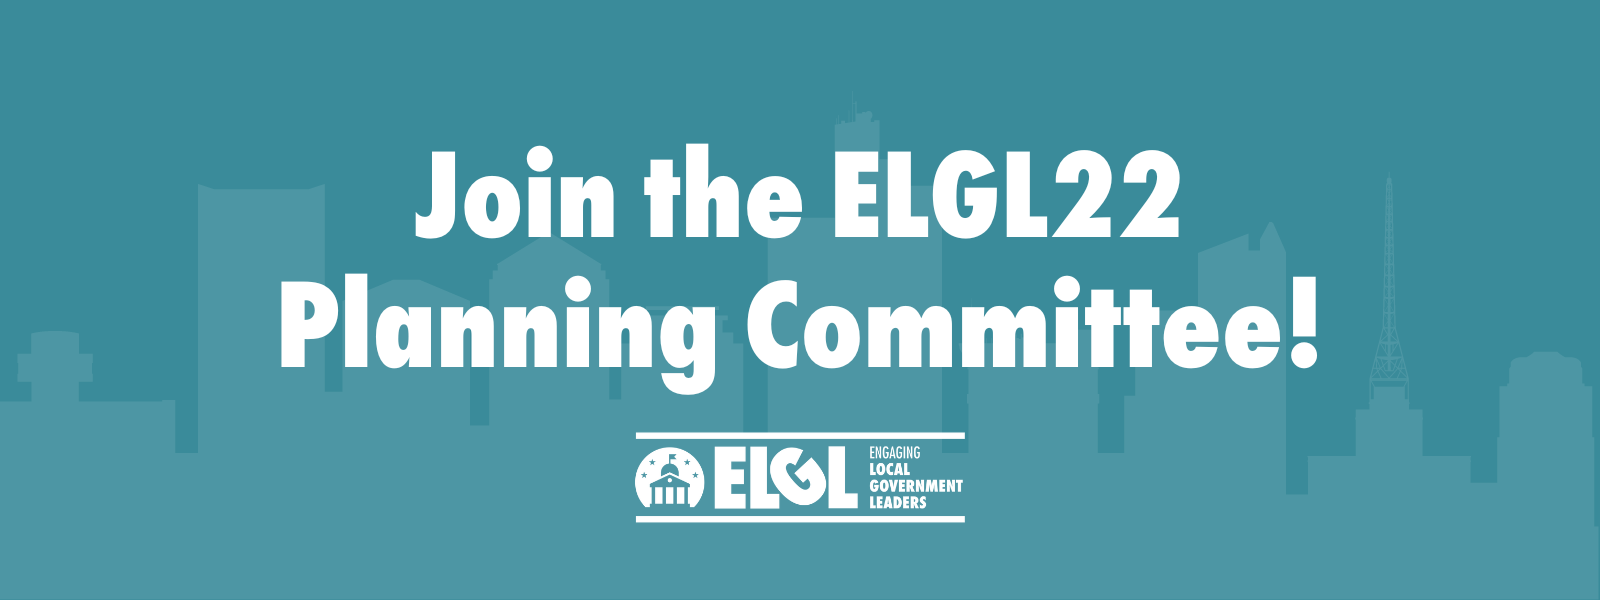 Teal background with a silhouette of the Phoenix skyline. Text says "Join the ELGL22 Planning Committee"